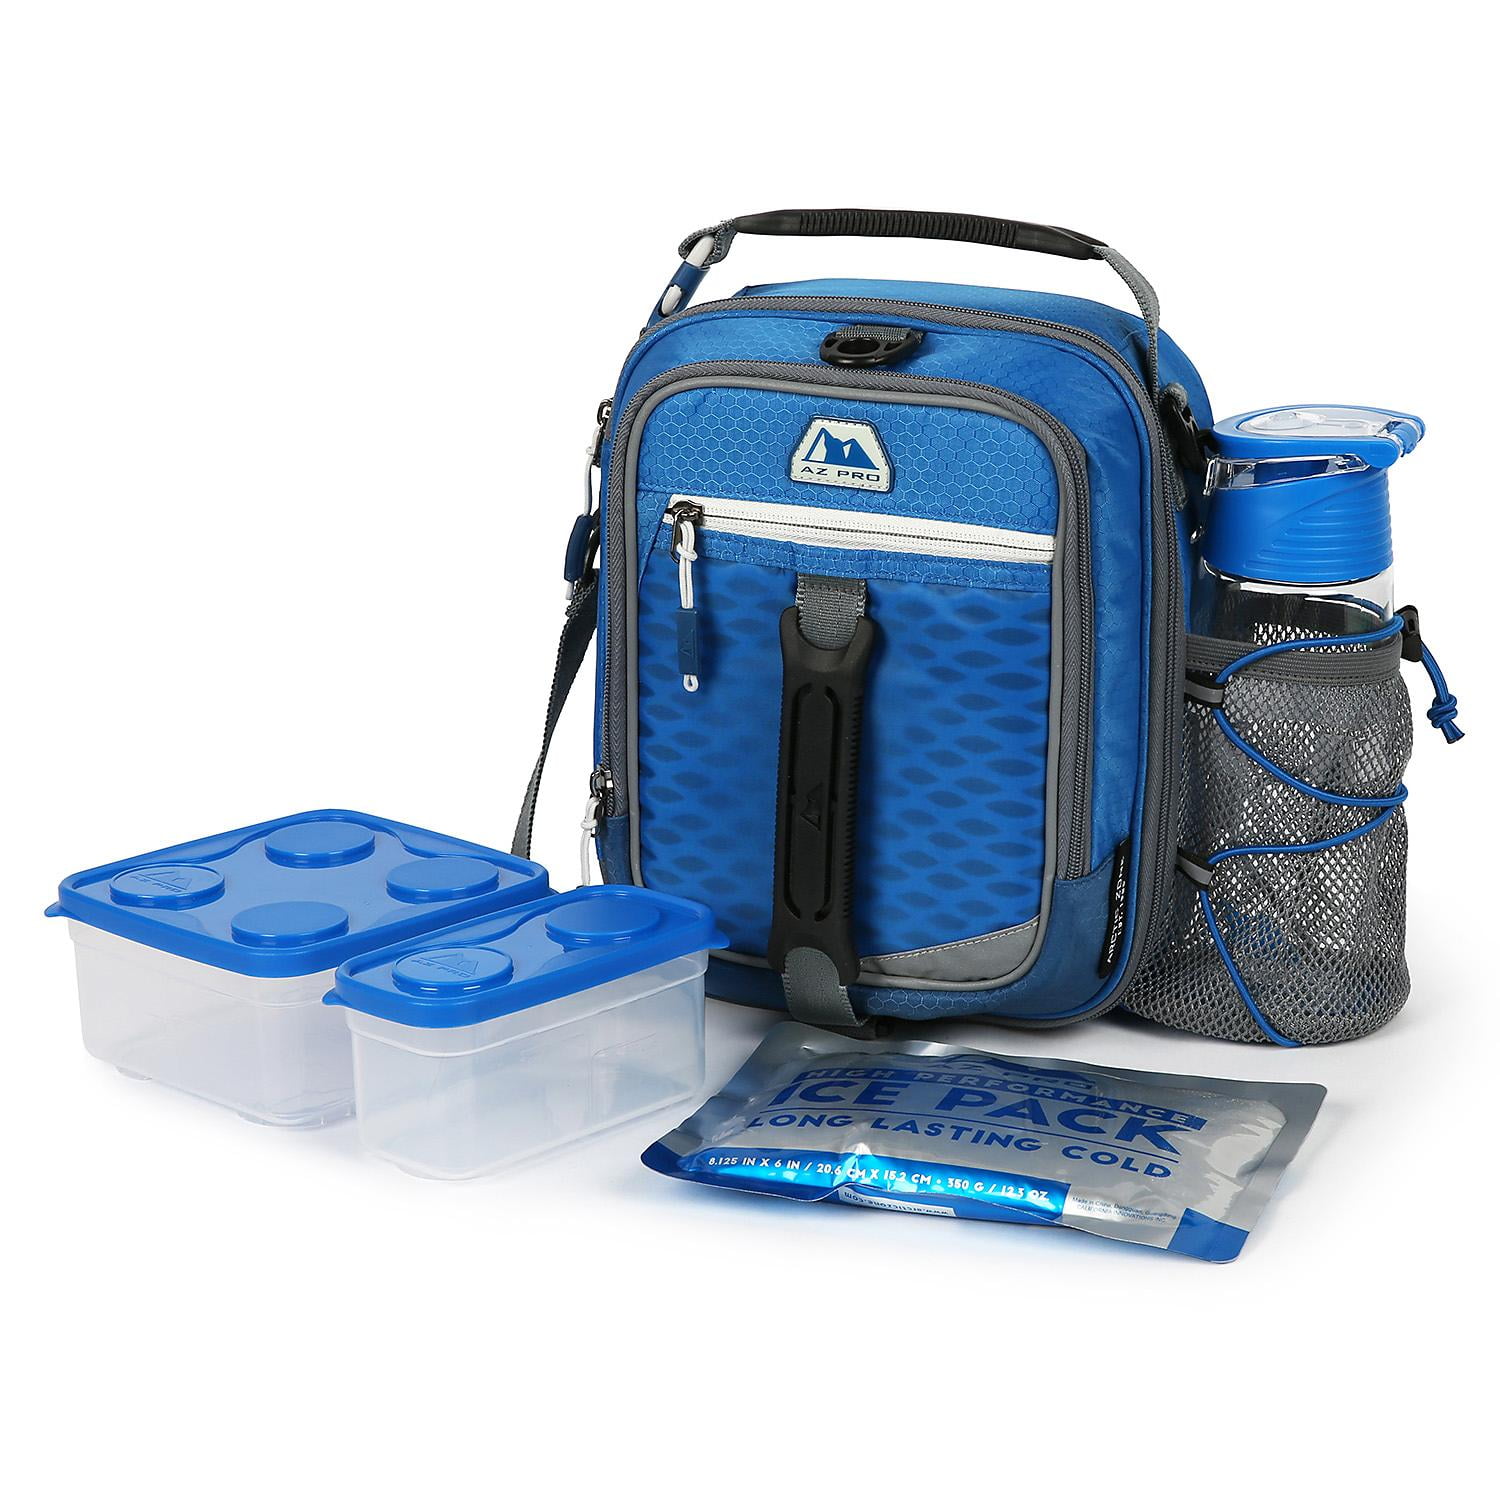 Ultra Artic Zone Lunchbox – C&I Office Supplies S.A.